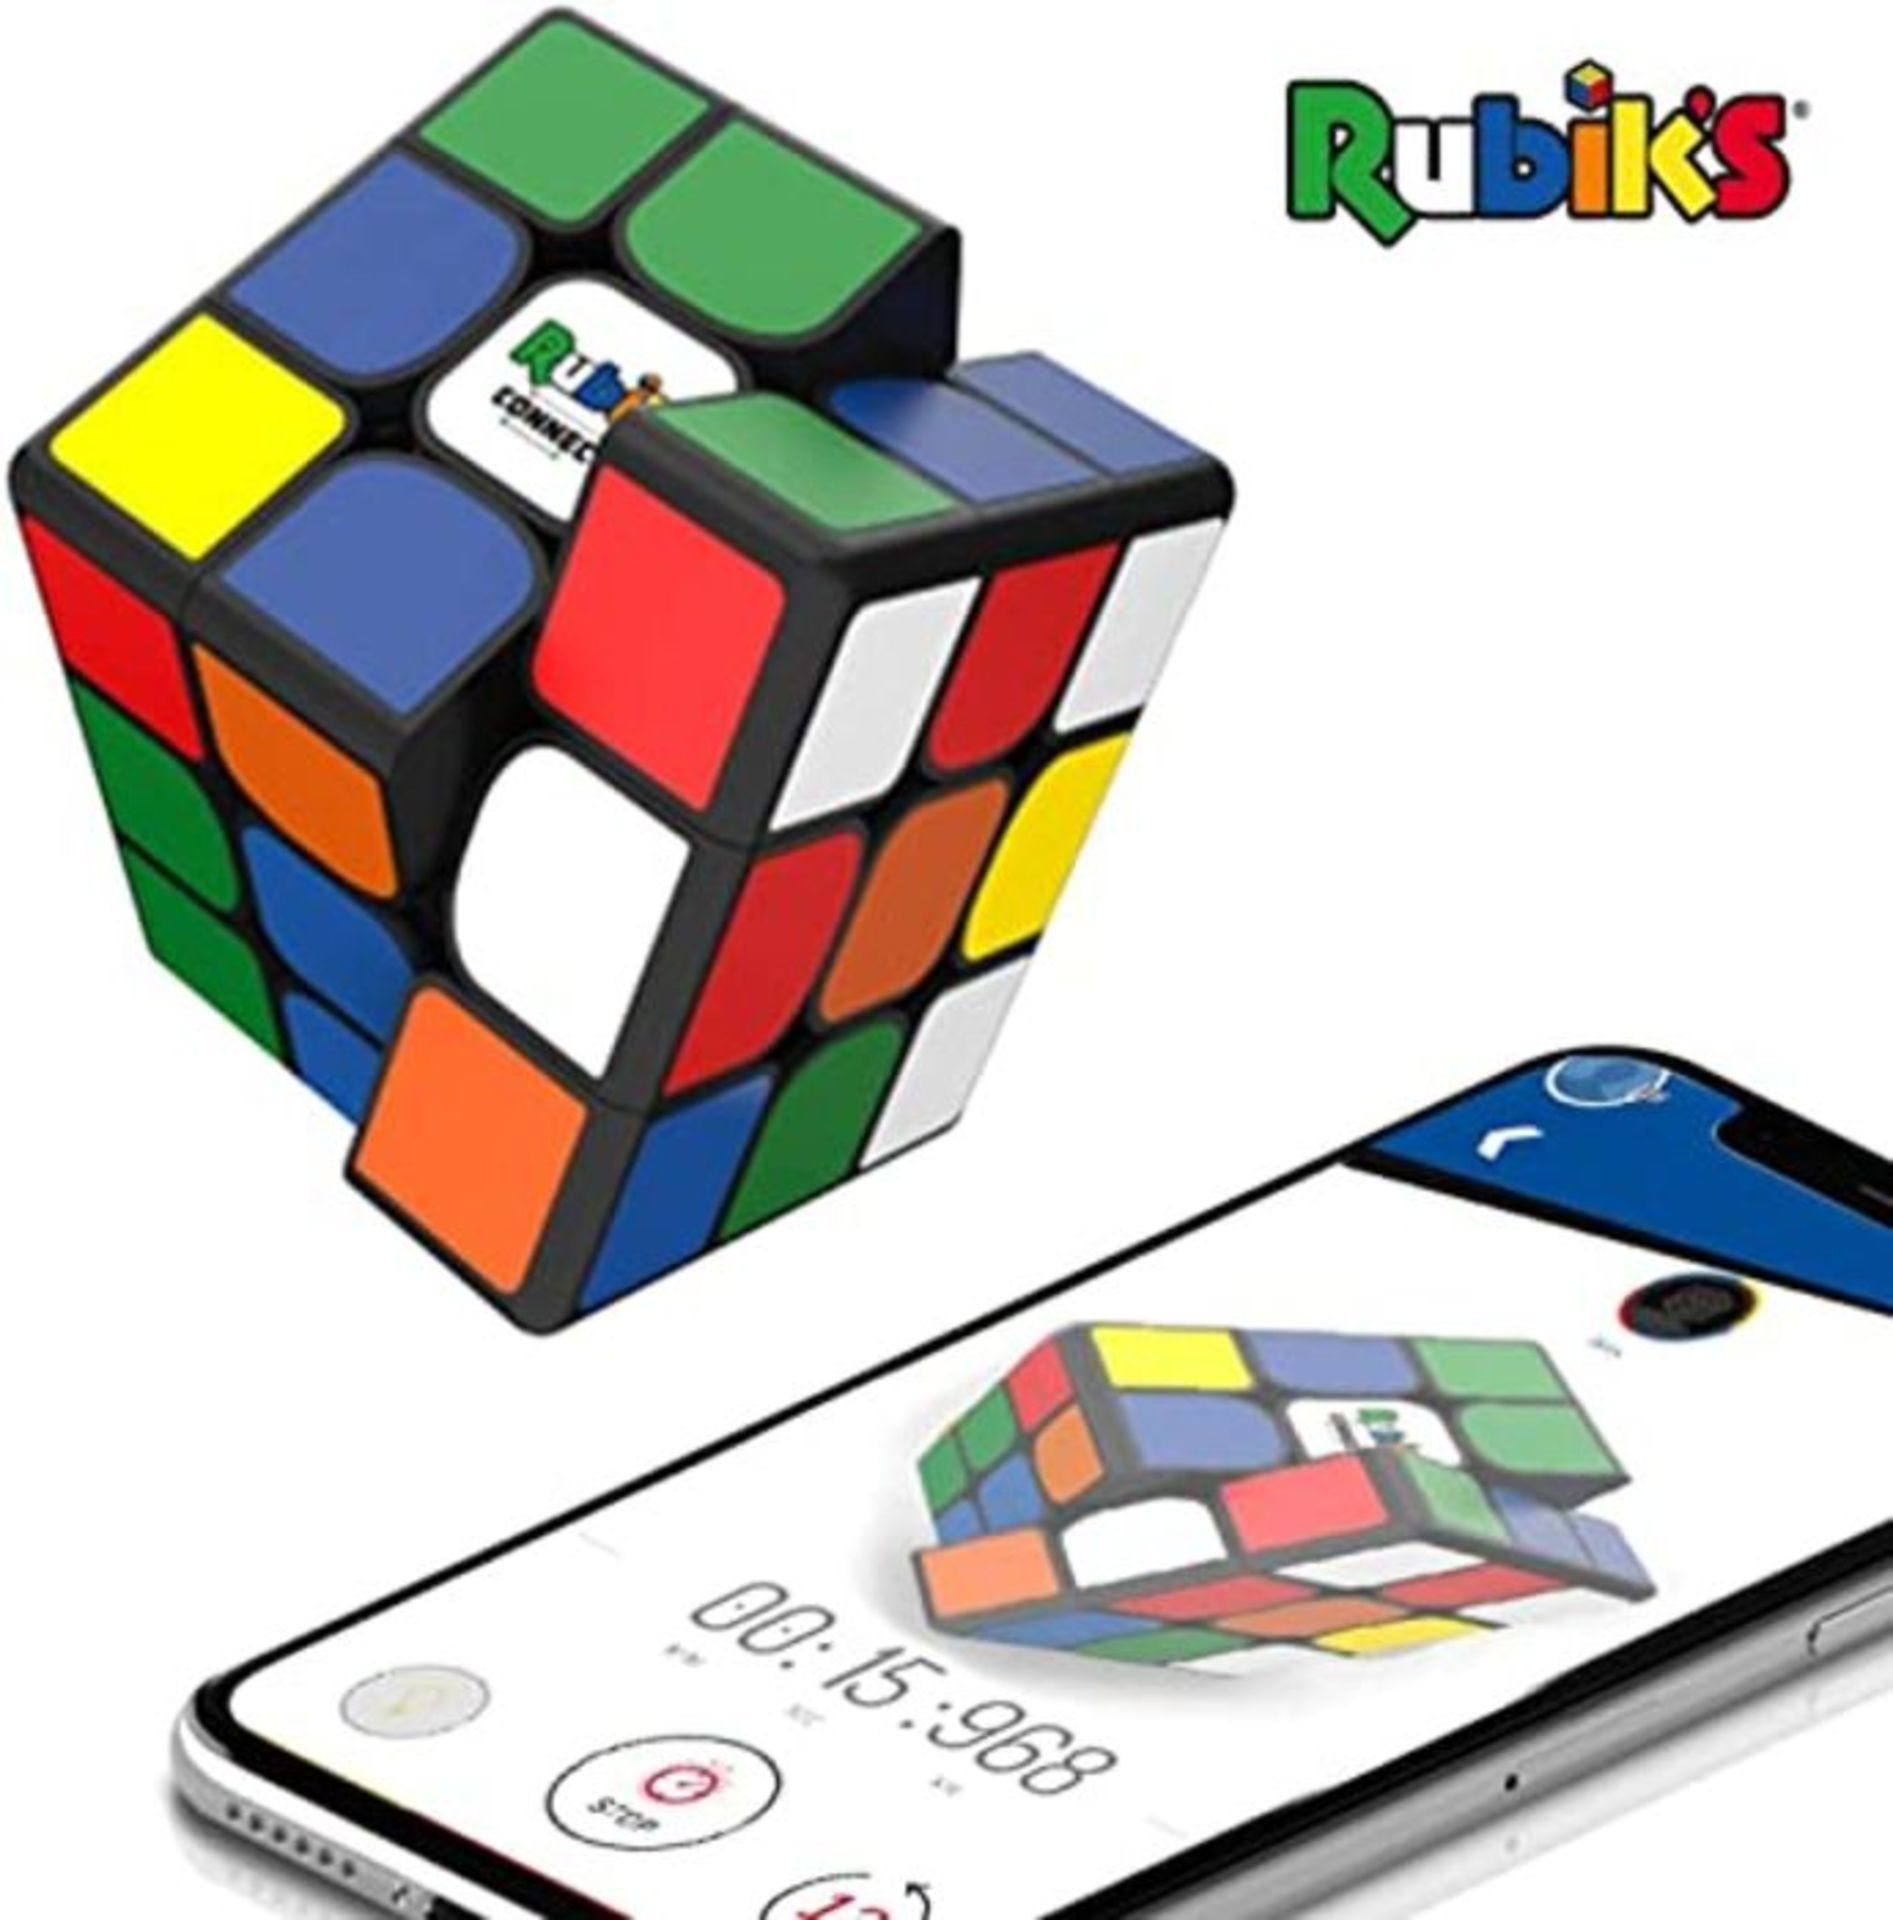 Rubikâ¬ "!s Connected - The Connected Electronic Rubikâ¬ "!s Cube That Allows Yo